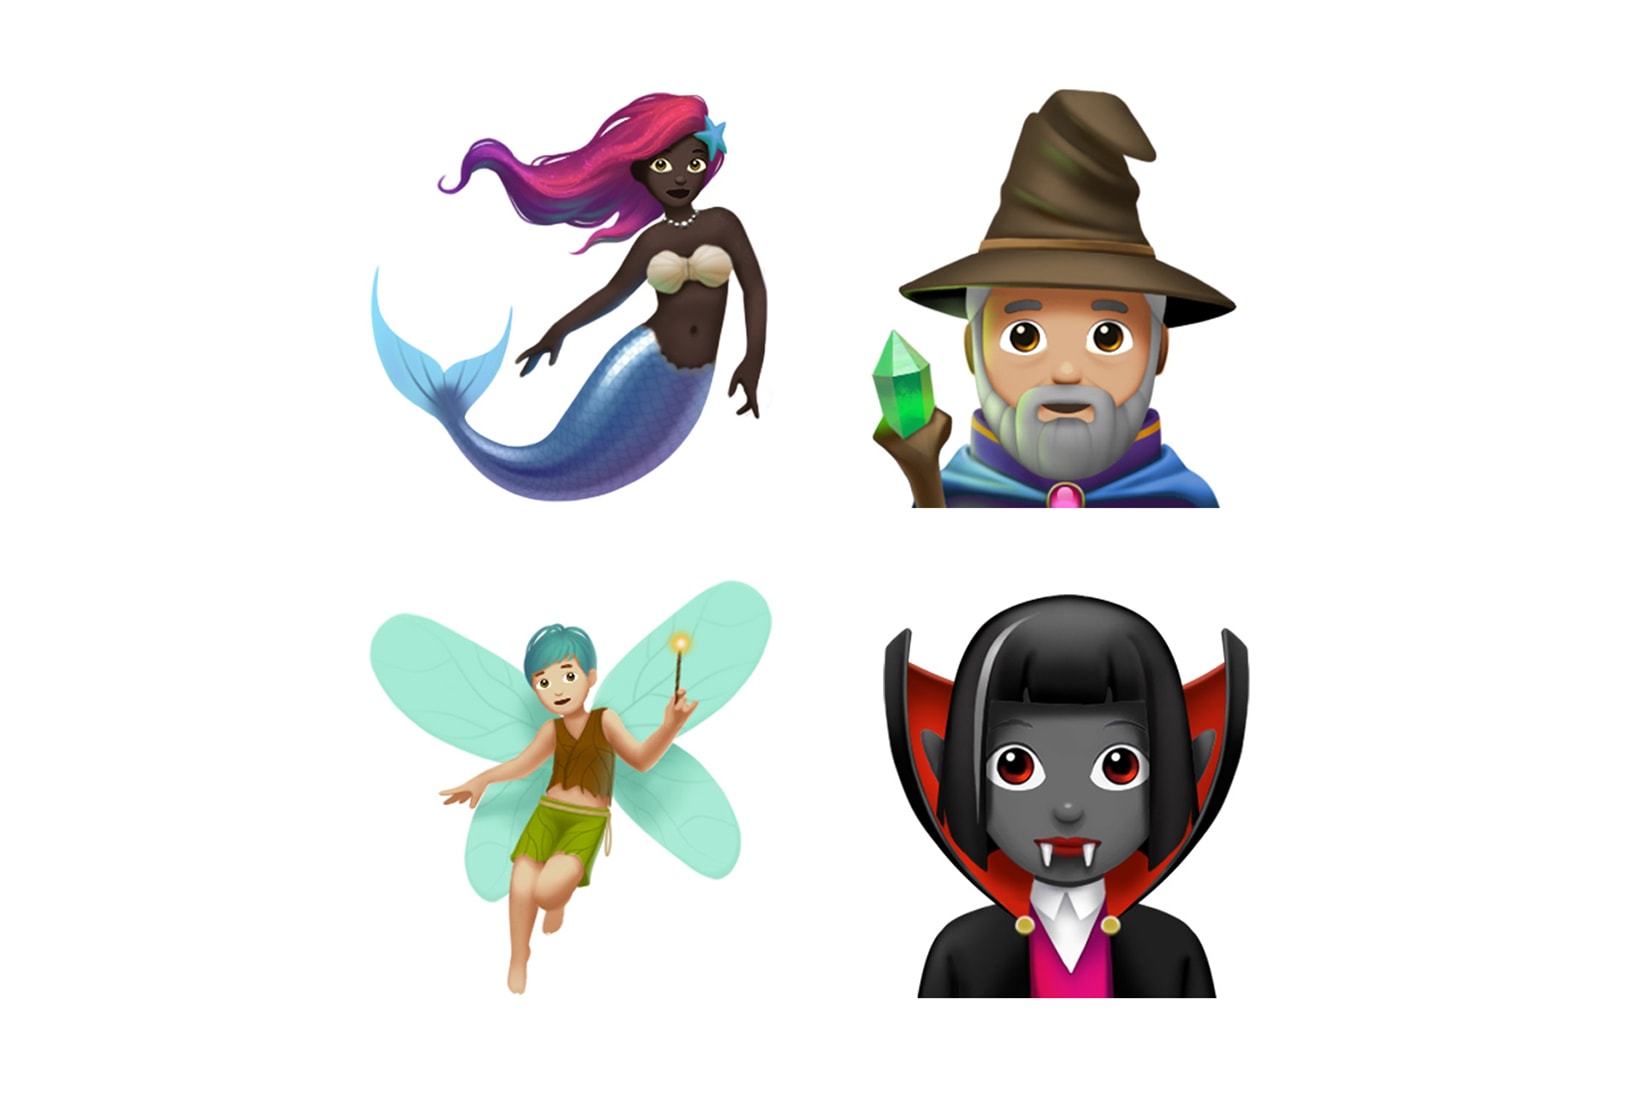 Apple iOS 11 1 Emoji Update Reveal Revealed Unveiled Introduced 2017 October 6